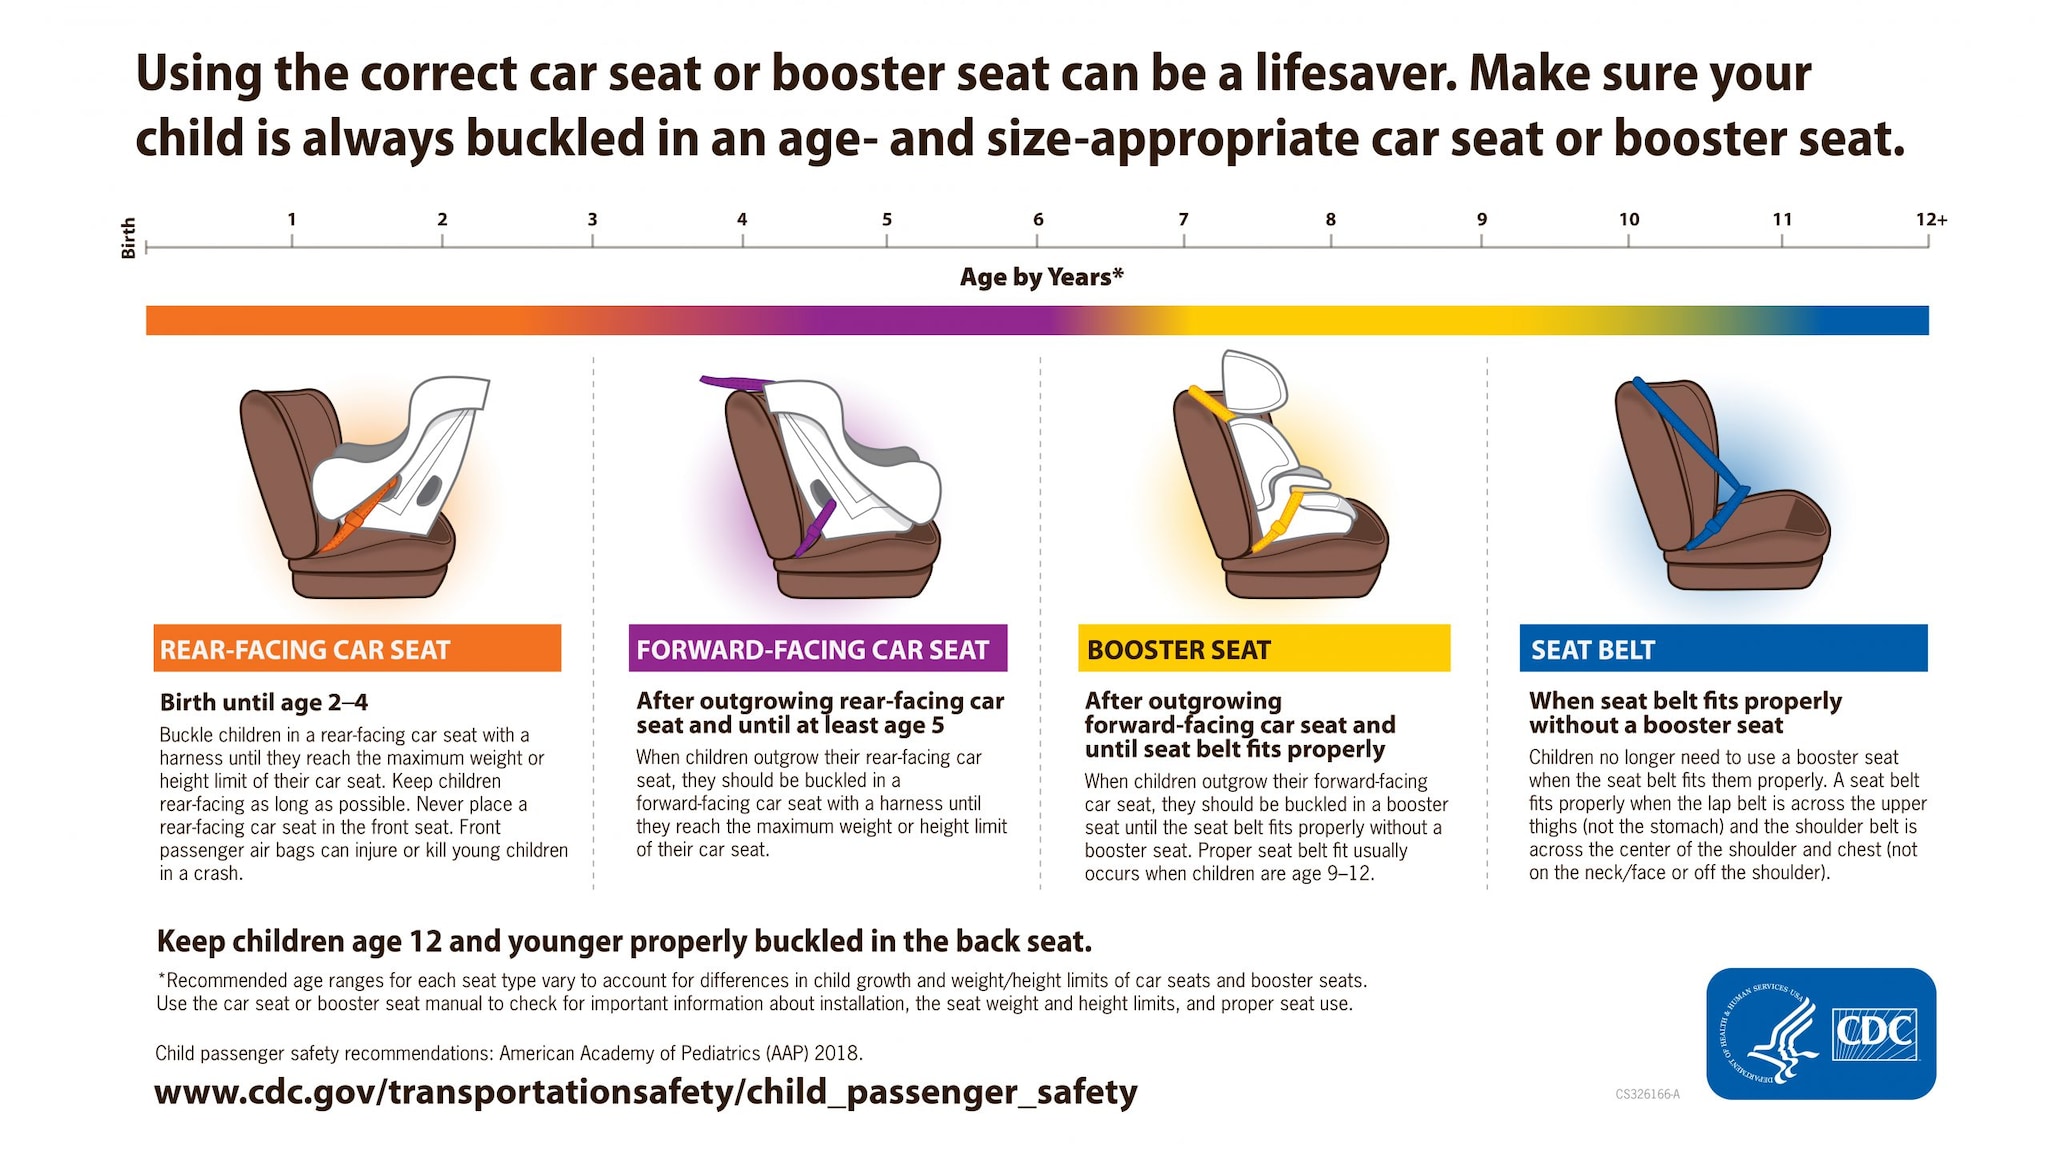 When Do You Change Your Child To A Booster Seat